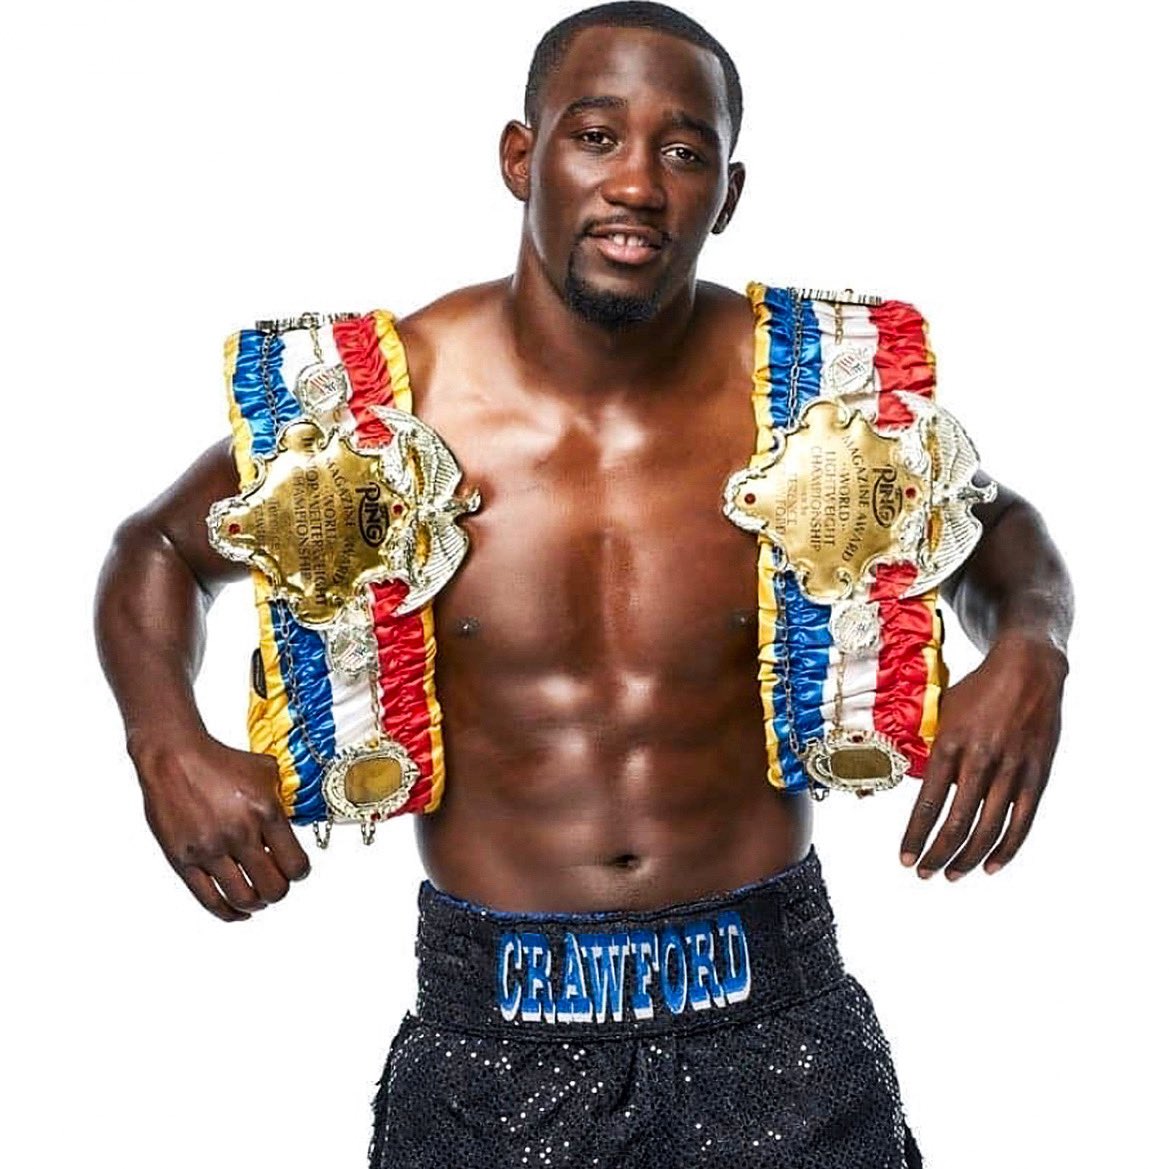 Crawford to challenge Madrimov in bid to become four-division champ